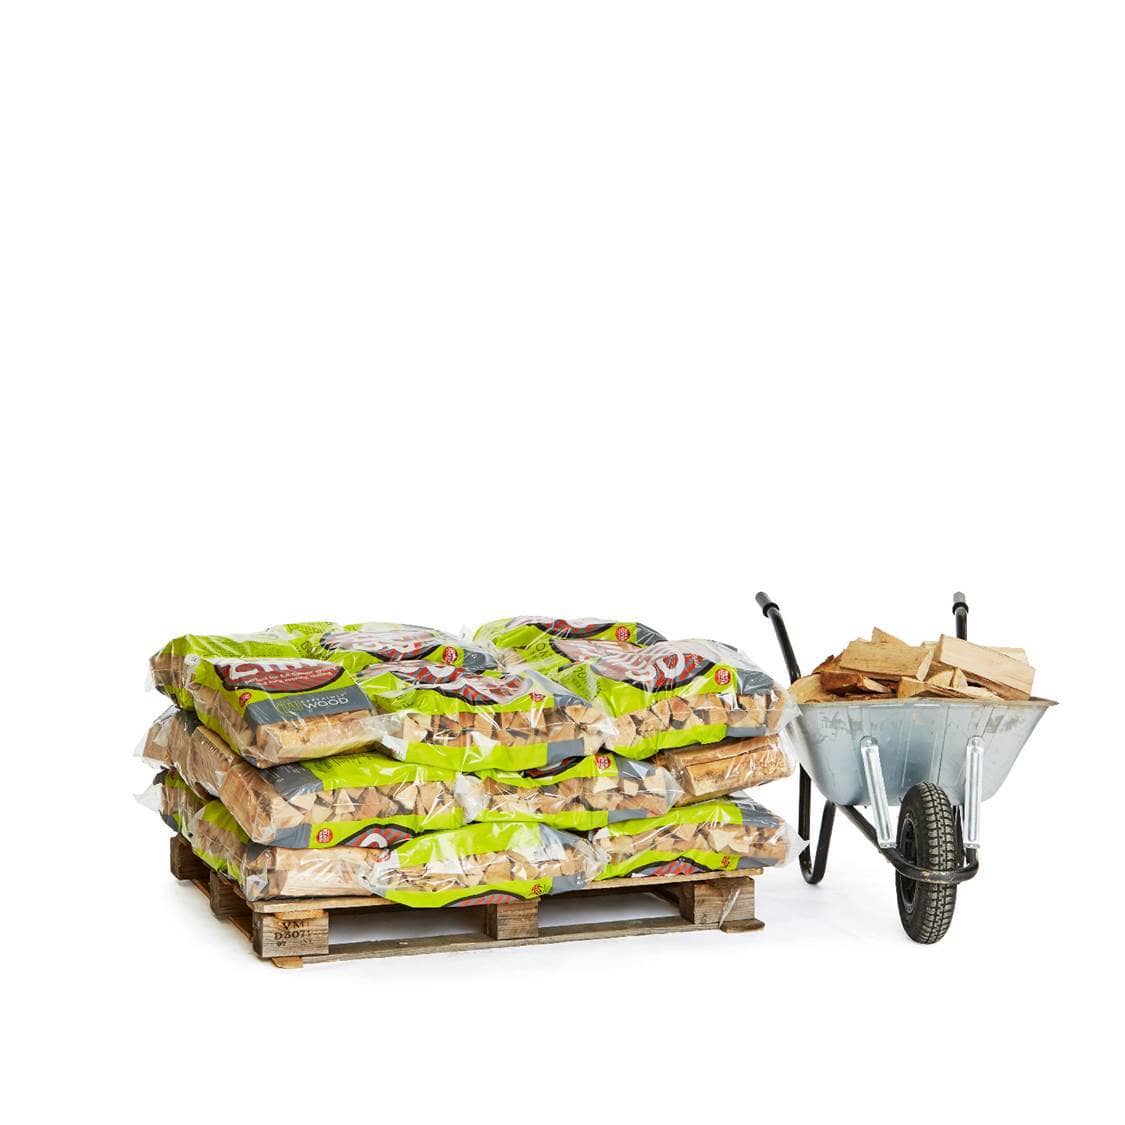 Grill & Chill Kiln Dried Logs For Outdoor Cooking in Pizza Ovens and Firepits 30 Bag Pallet